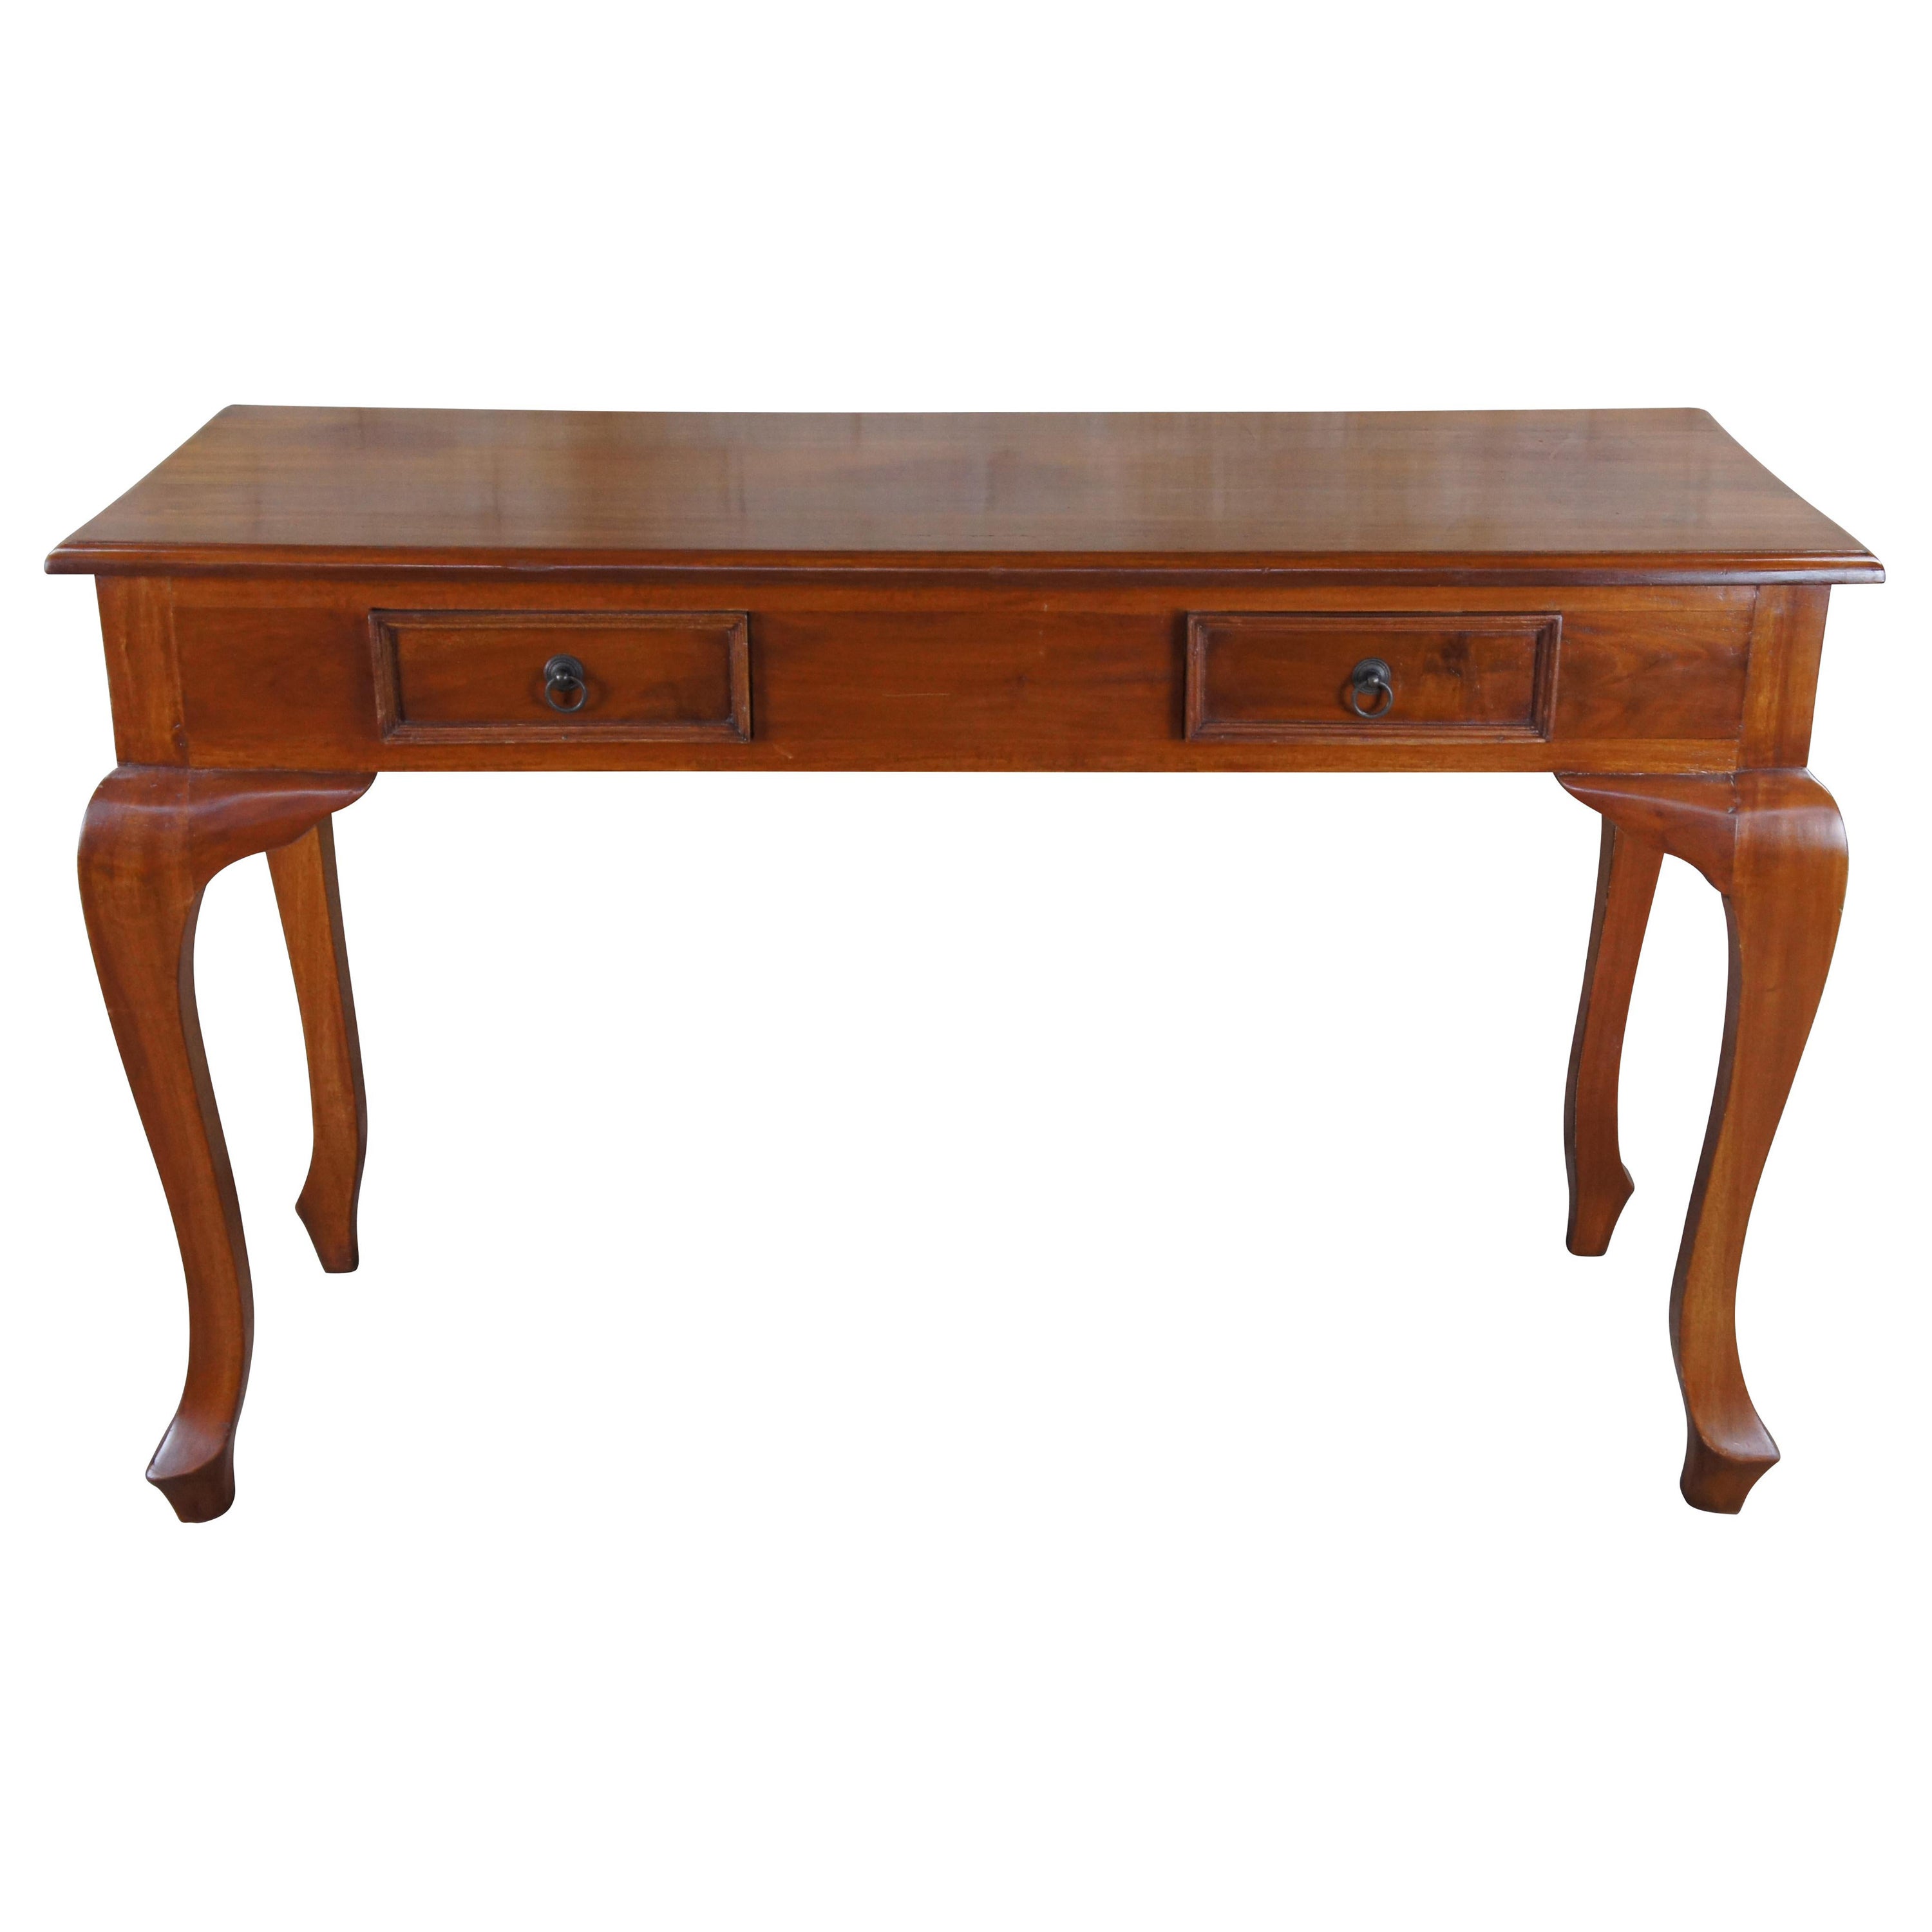 20th Century Solid Mahogany Queen Anne Style Console Table Vanity Makeup Desk For Sale